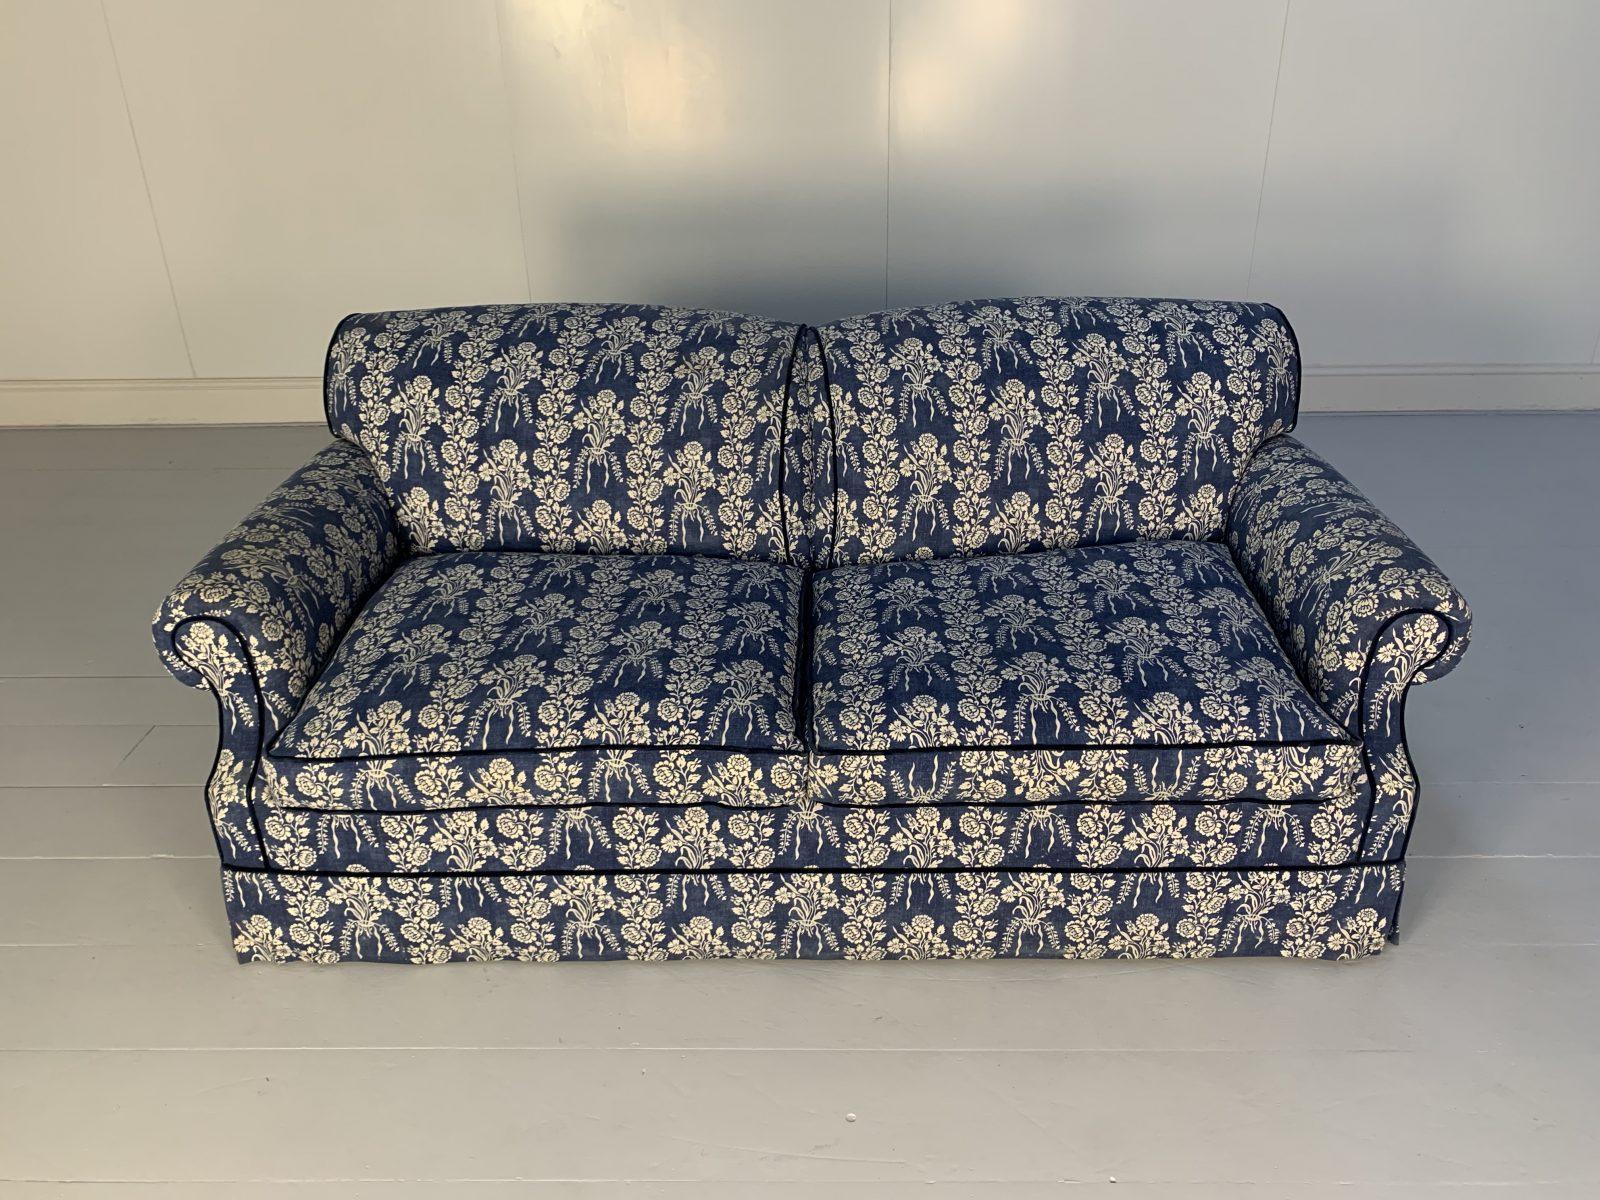 patterned sofa bed